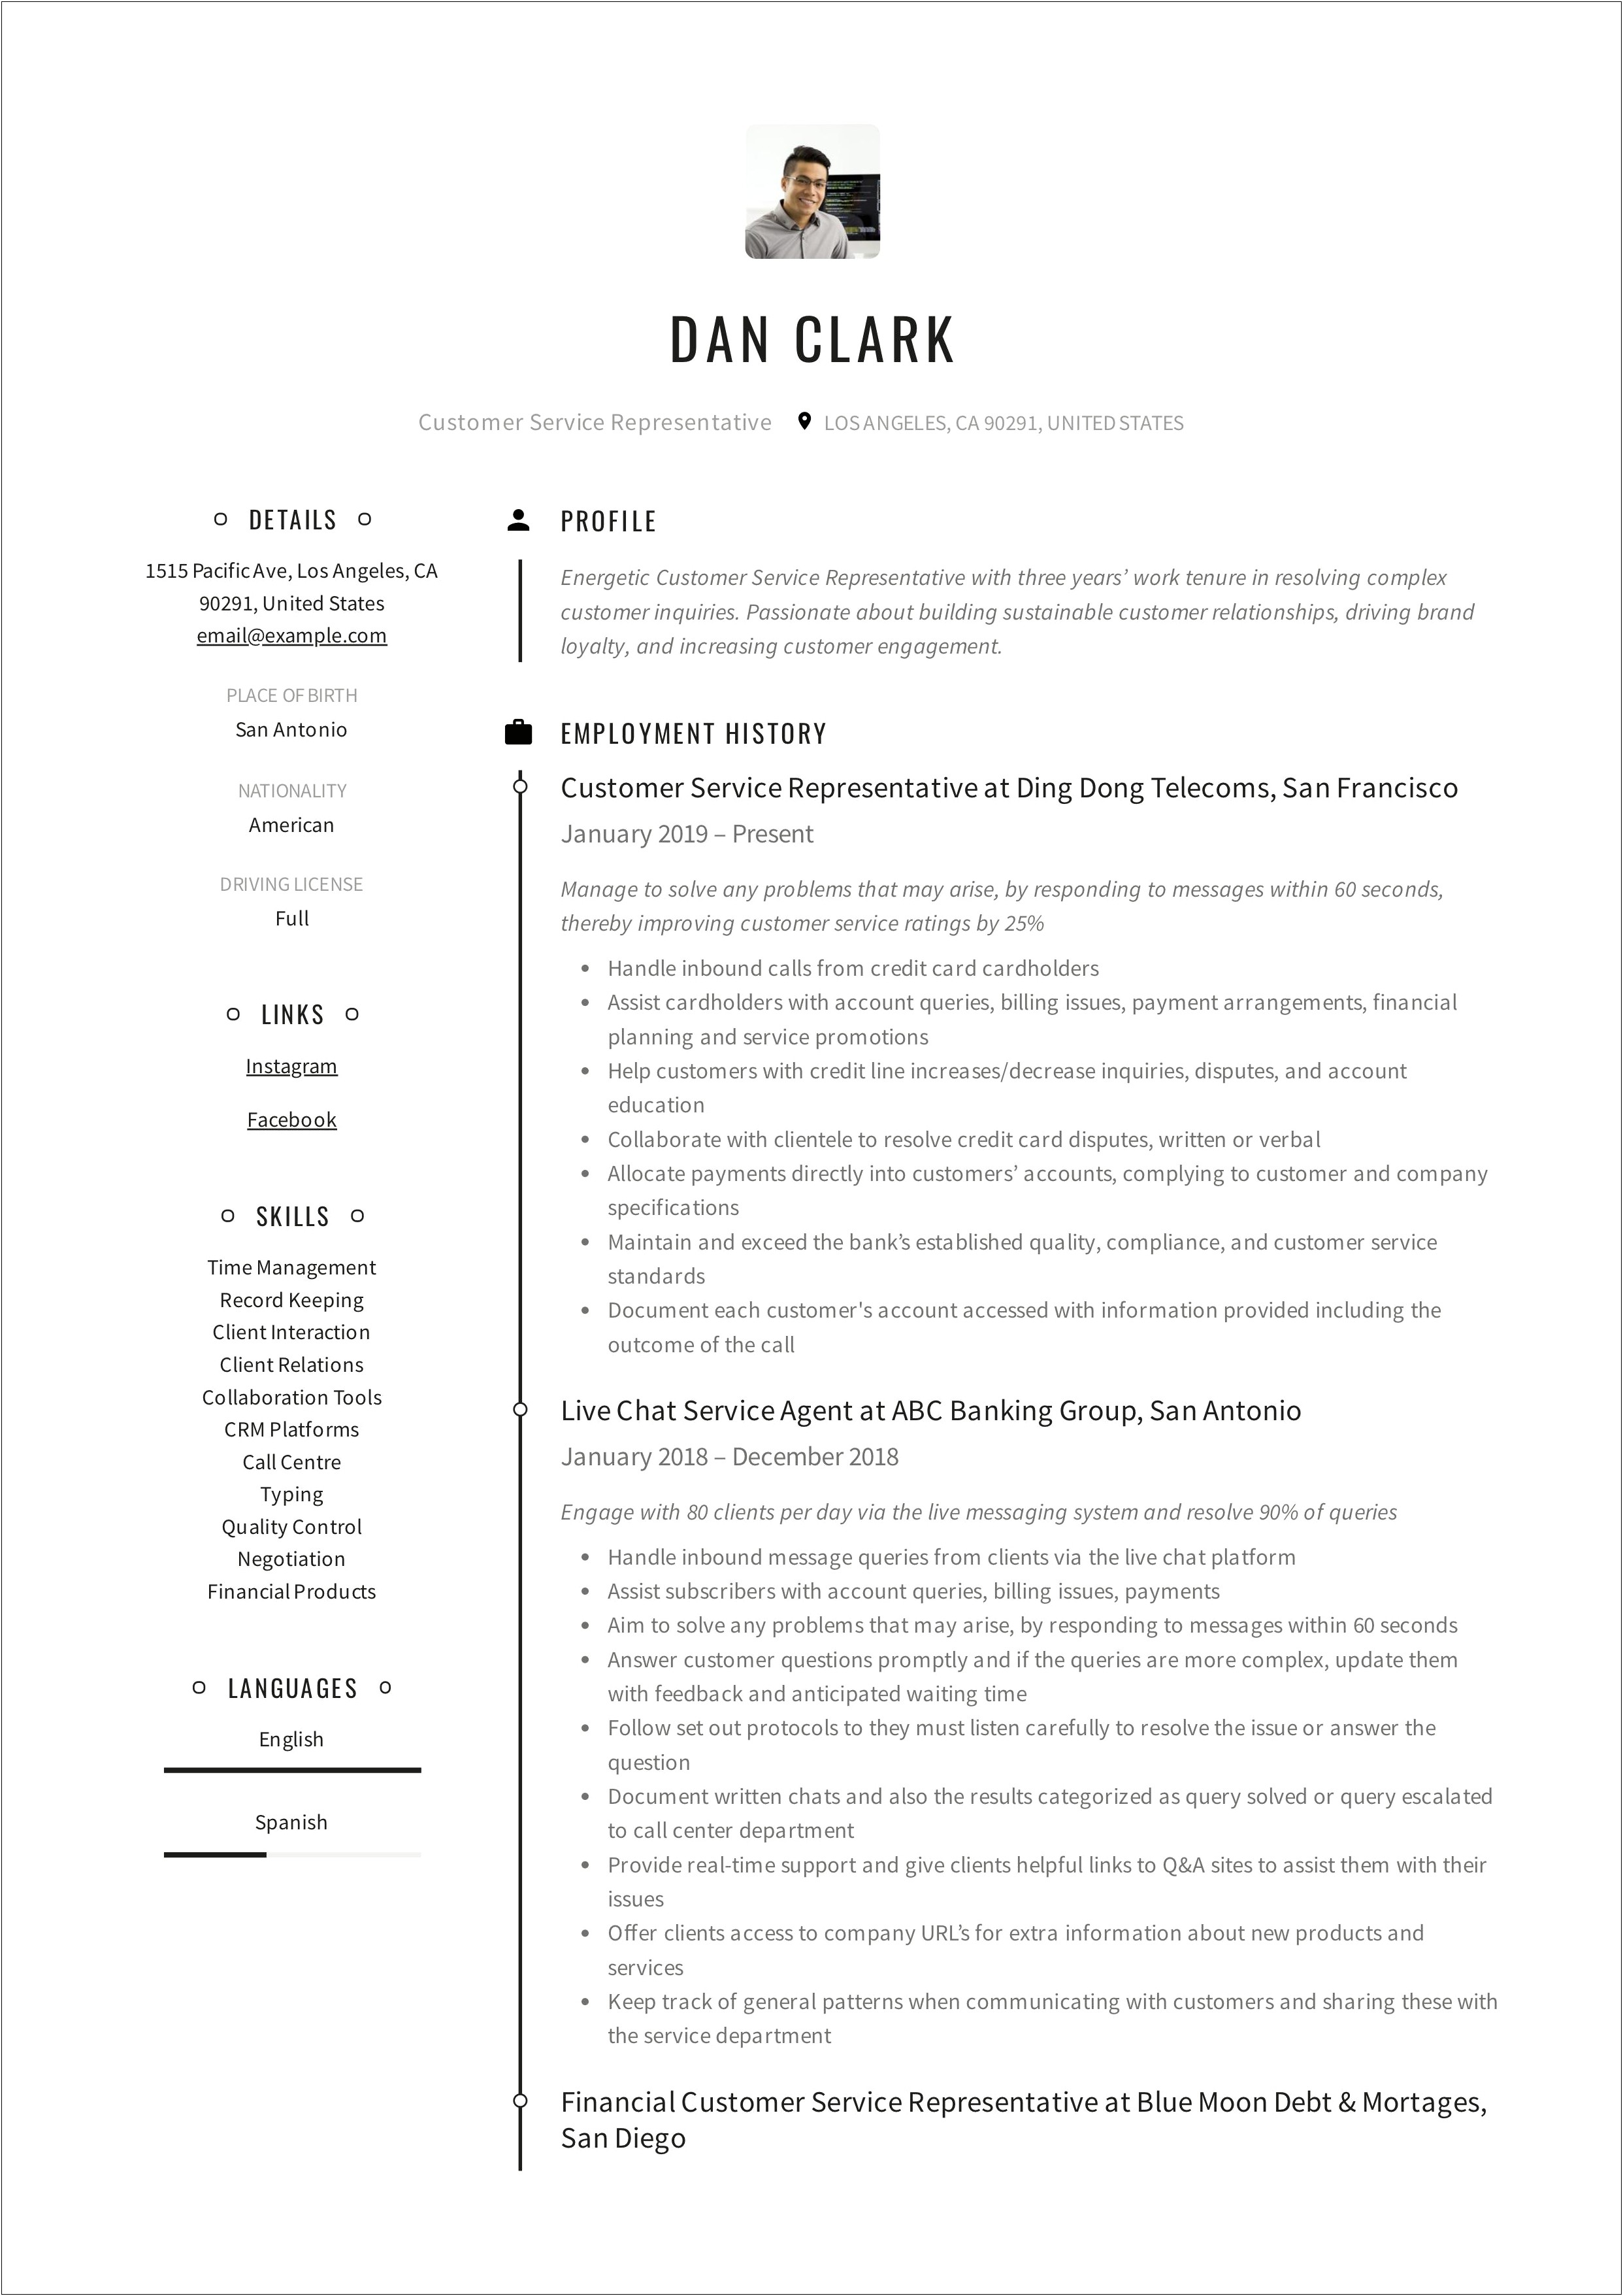 Resume Examples For Customer Claims Service Representative